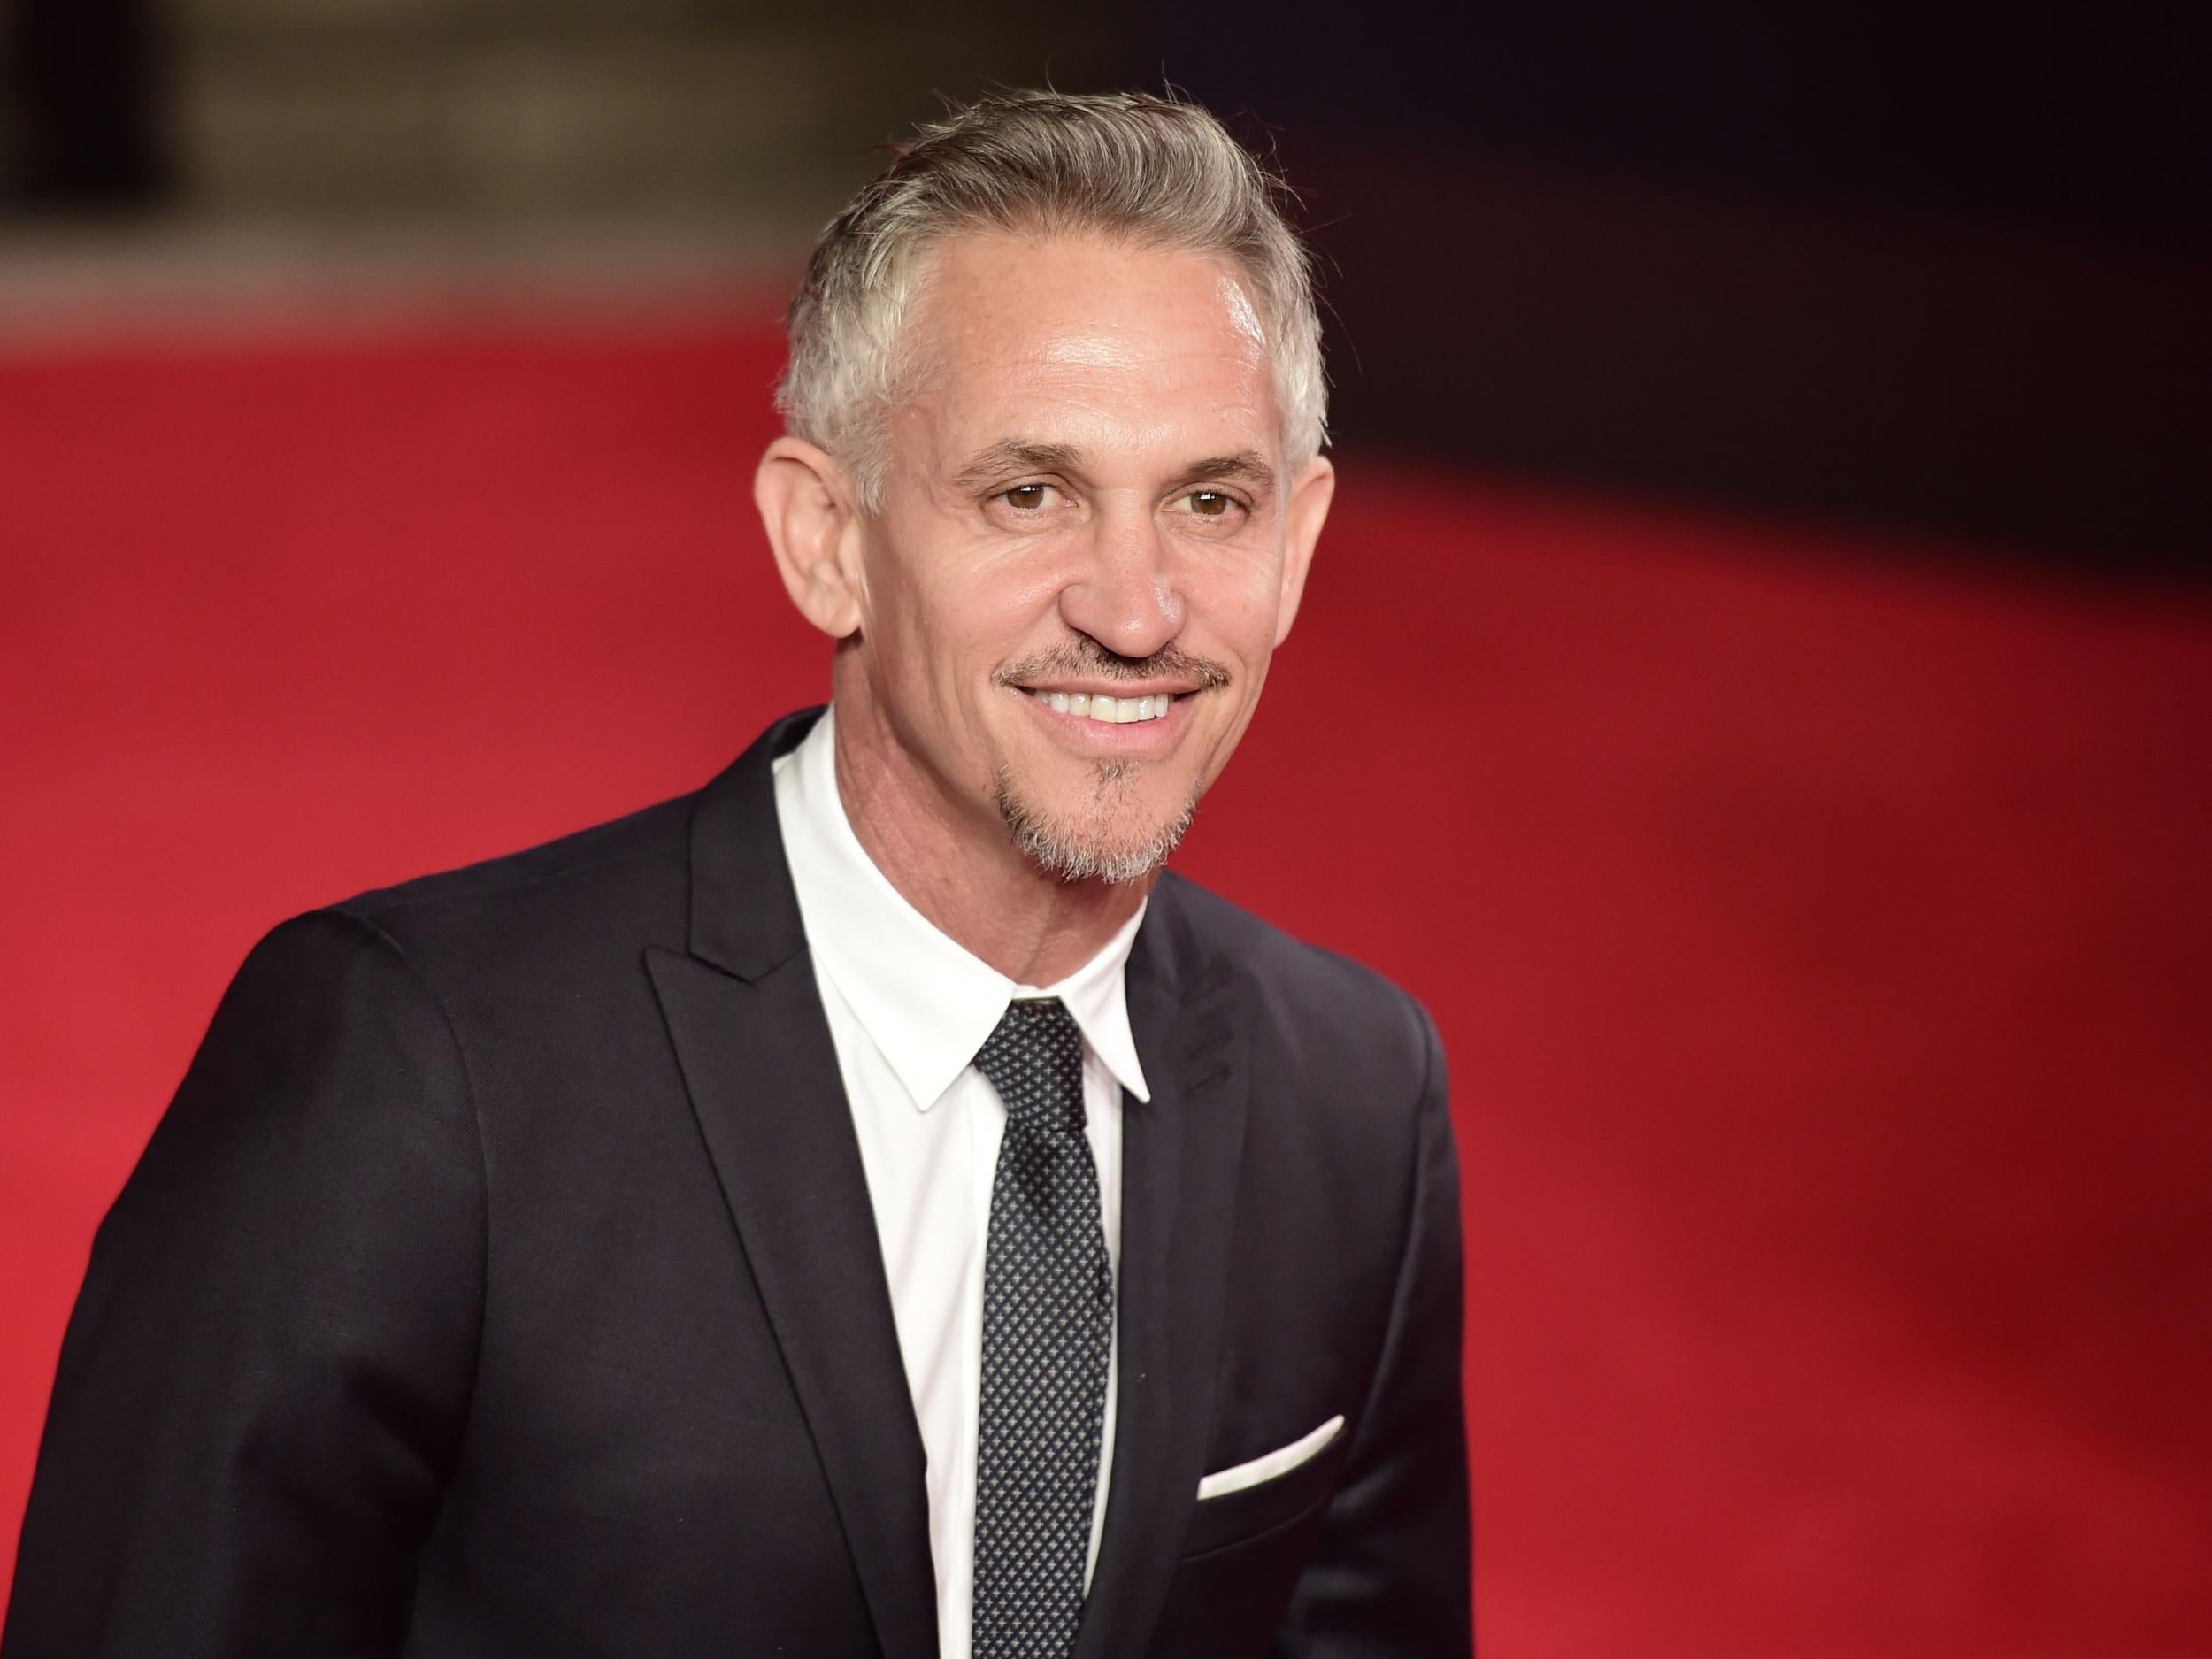 Lineker replaces Chris Evans at the top, earning £1.75m – around £1.3m more than its highest earning woman, Claudia Winkleman